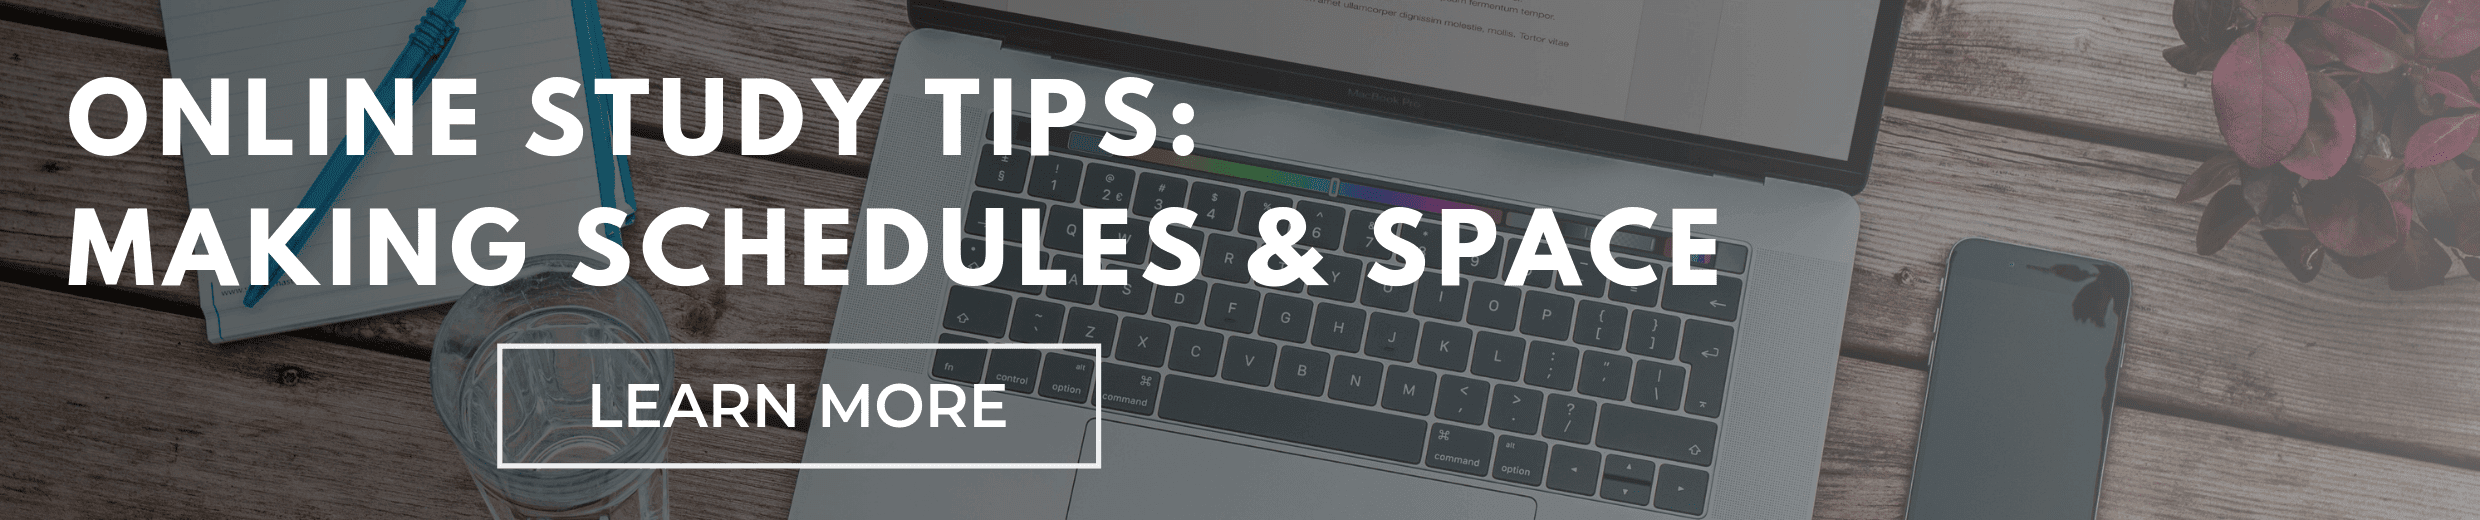 Online Study Tips: Making Schedules and Space